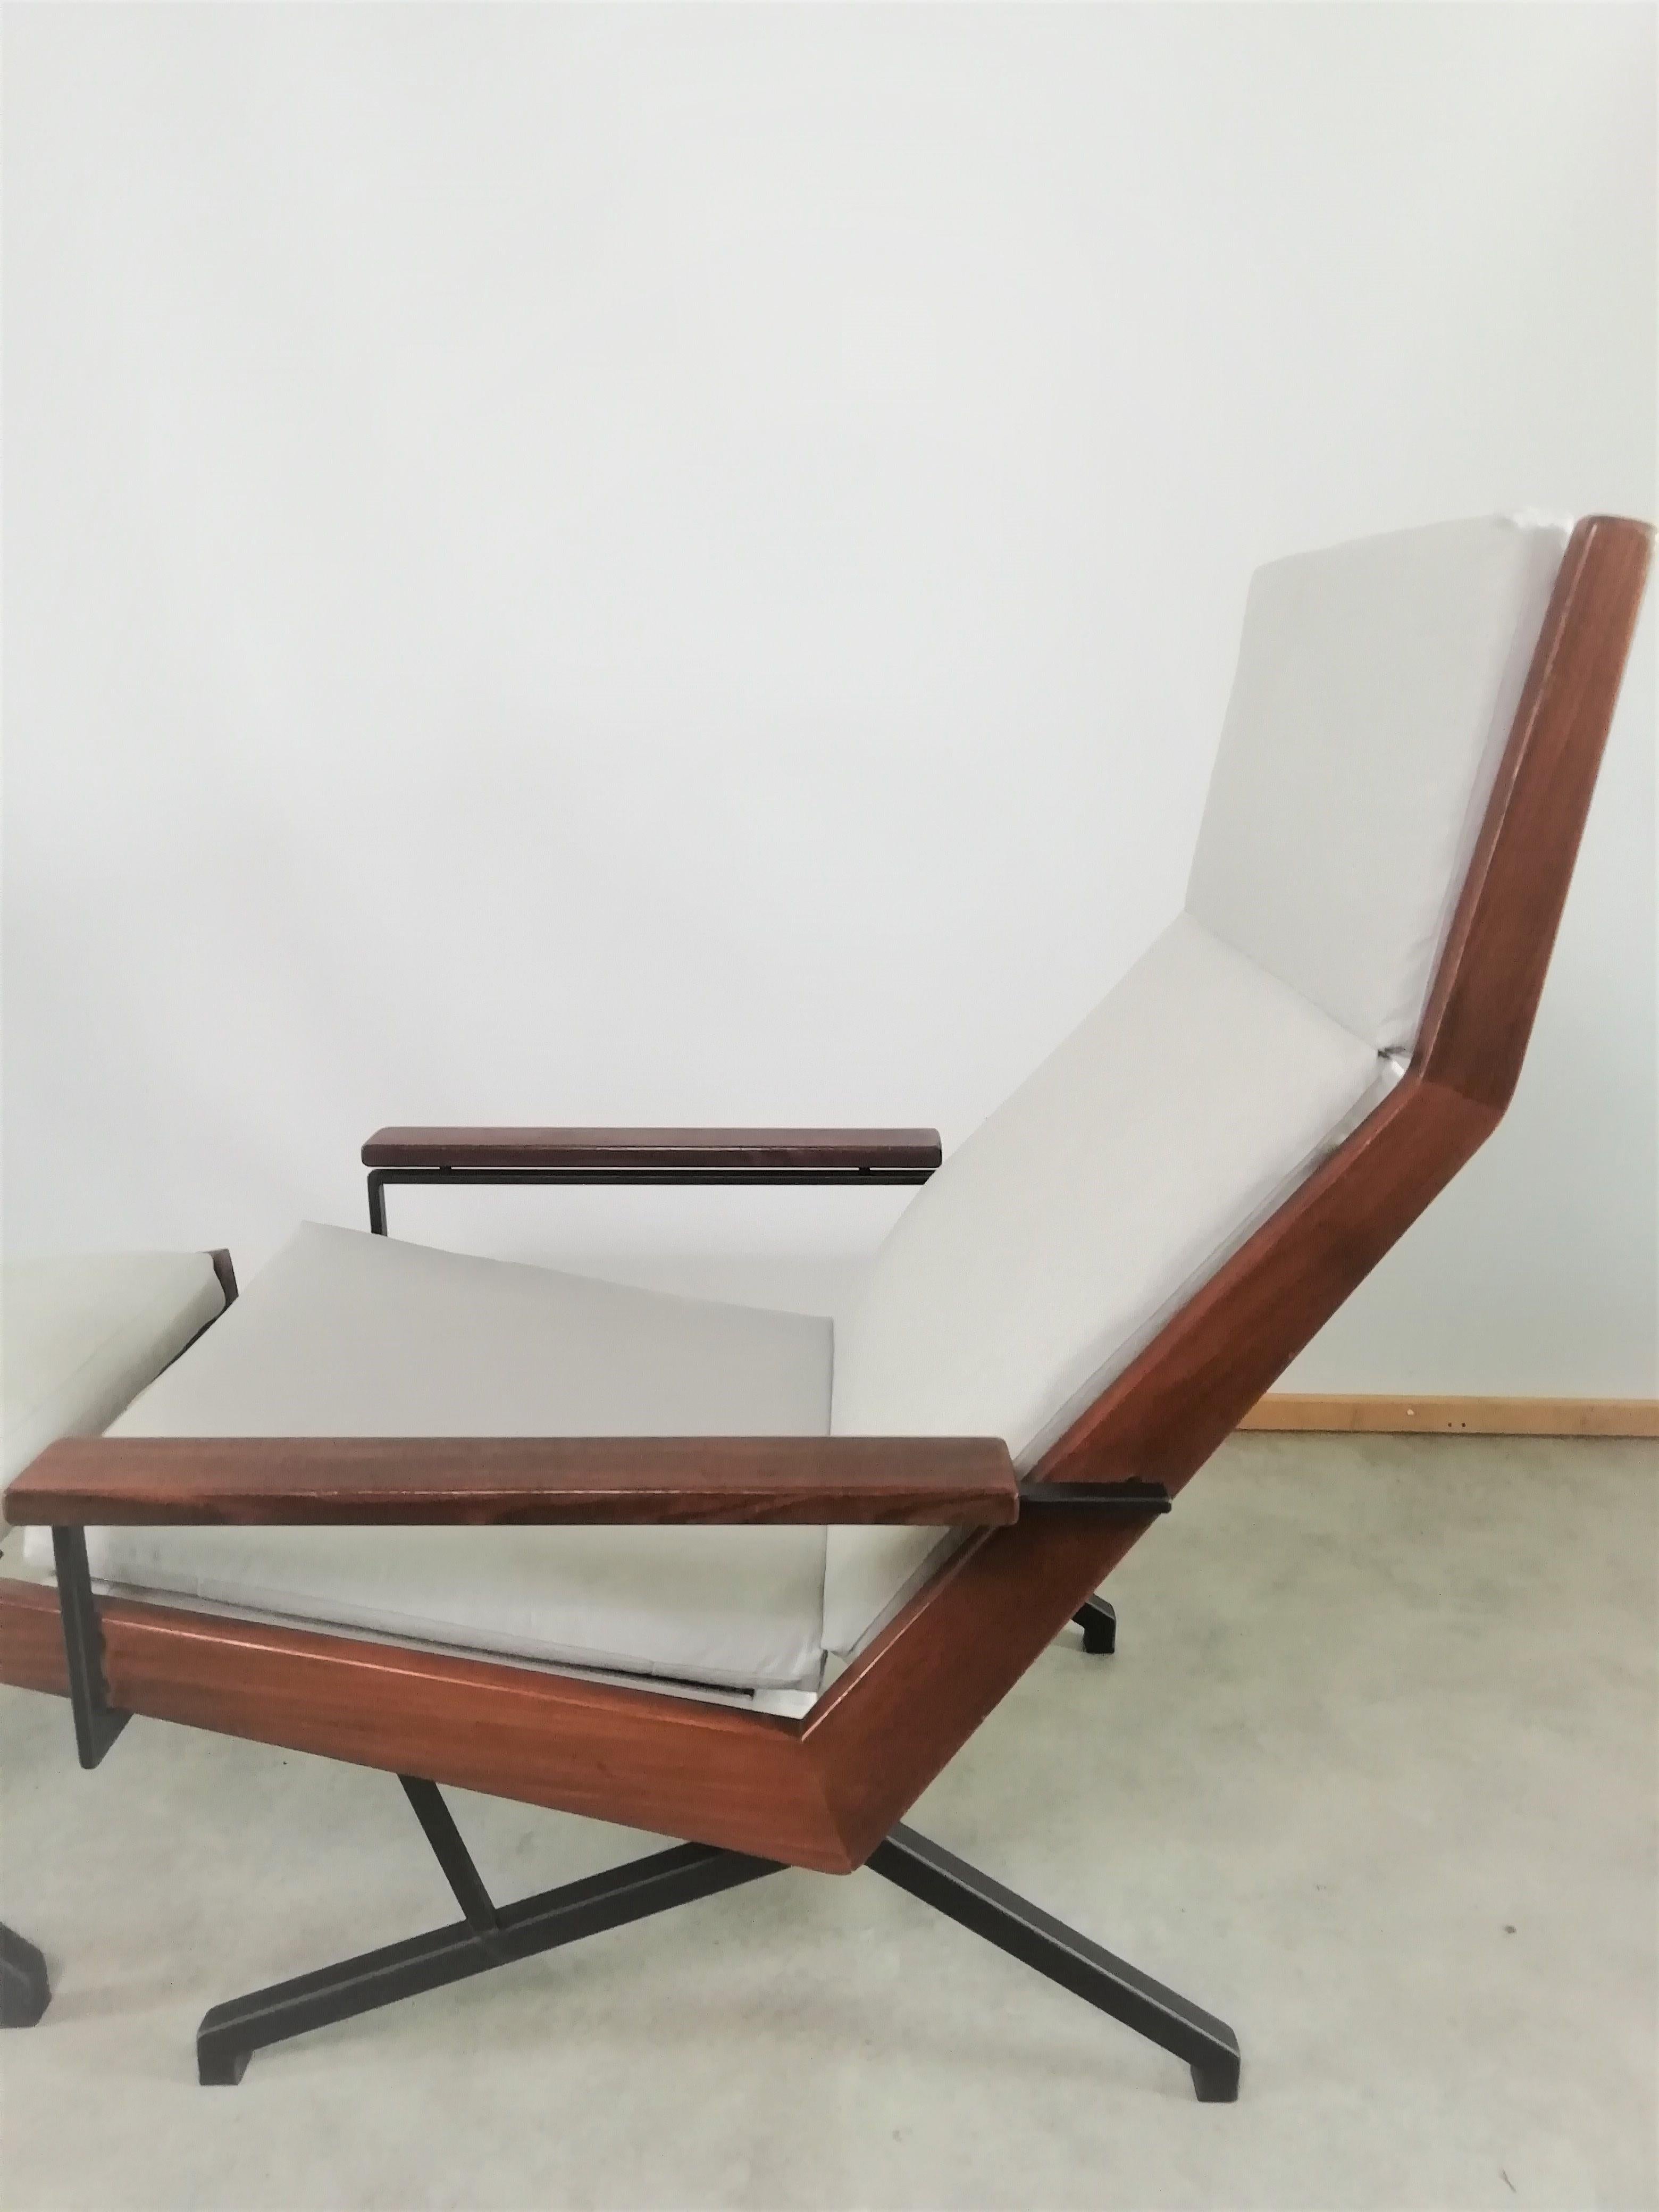 Mid-20th Century Rob Parry “Lotus” Lounge Chair for Gelderland, 1950’s